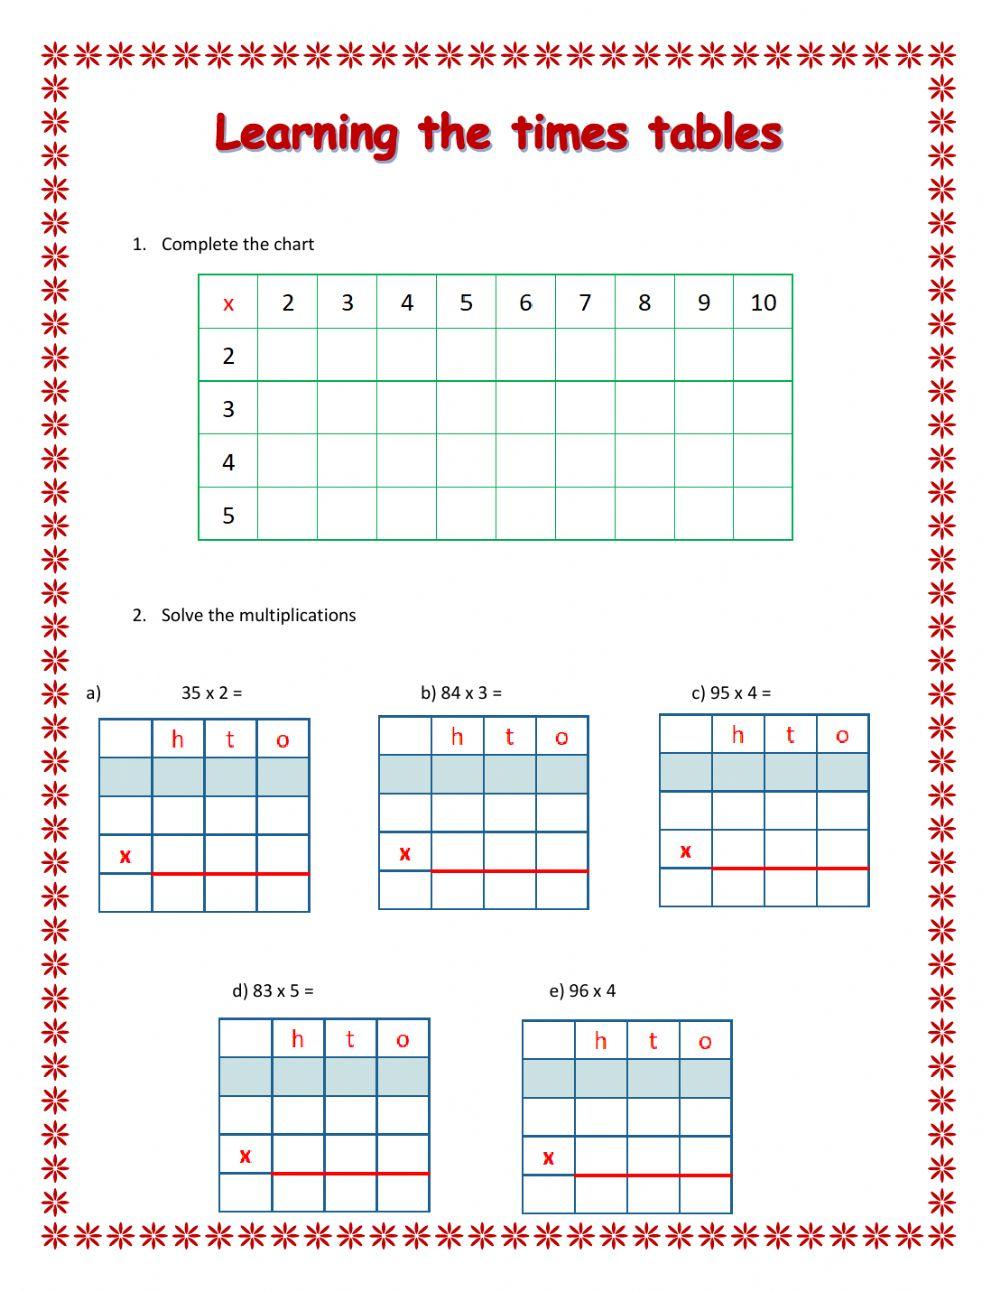 Times tables 2-5